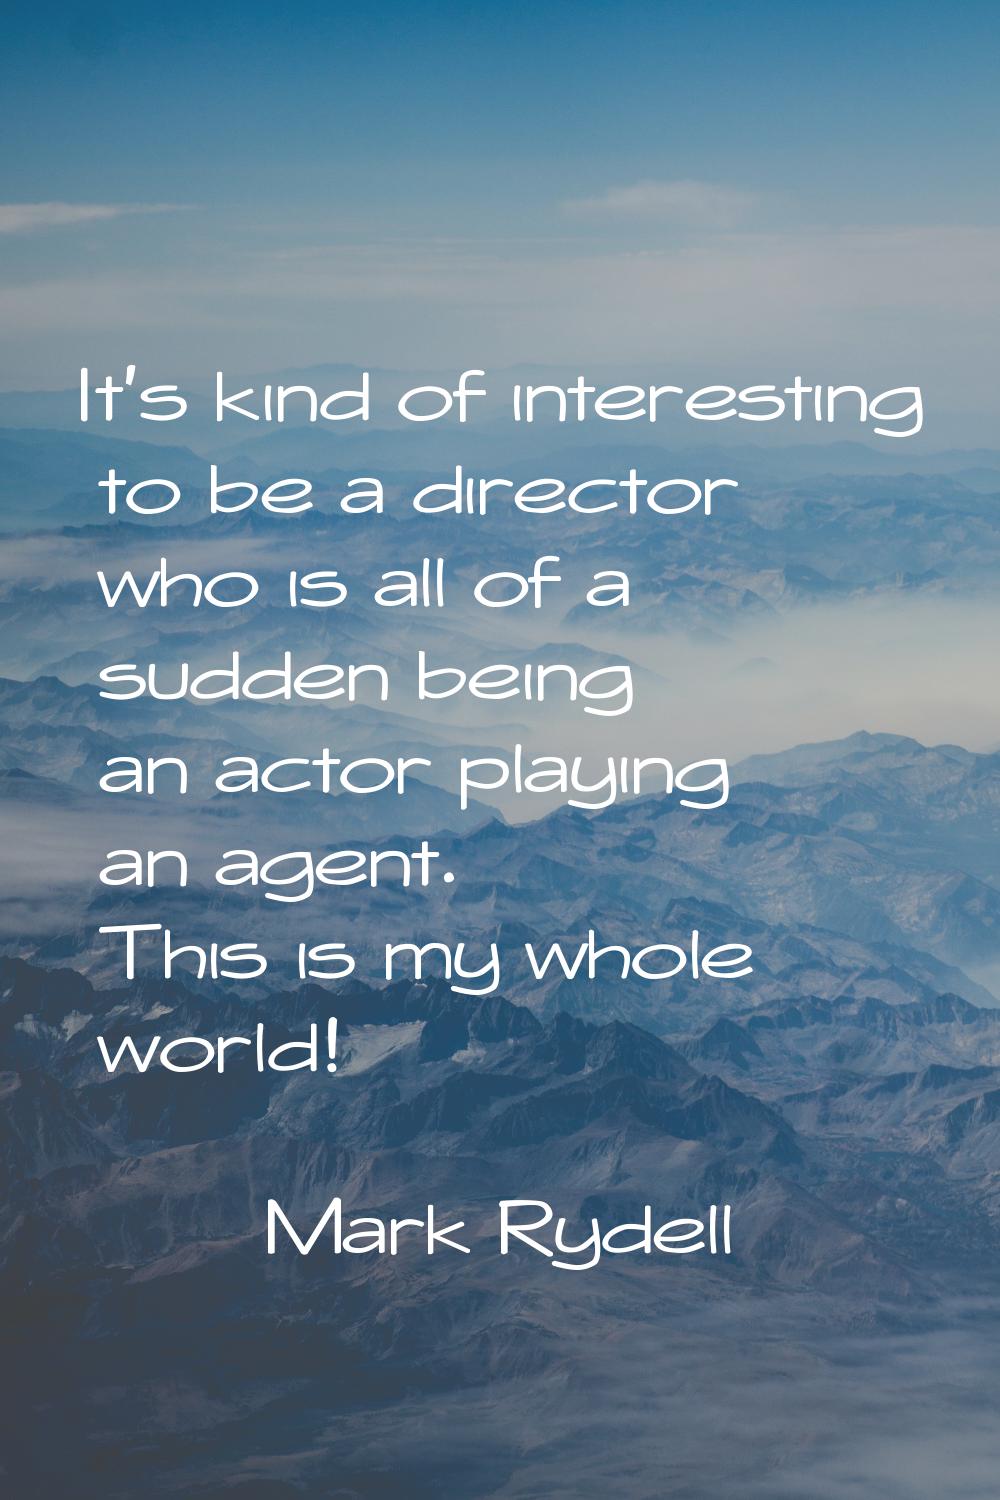 It's kind of interesting to be a director who is all of a sudden being an actor playing an agent. T